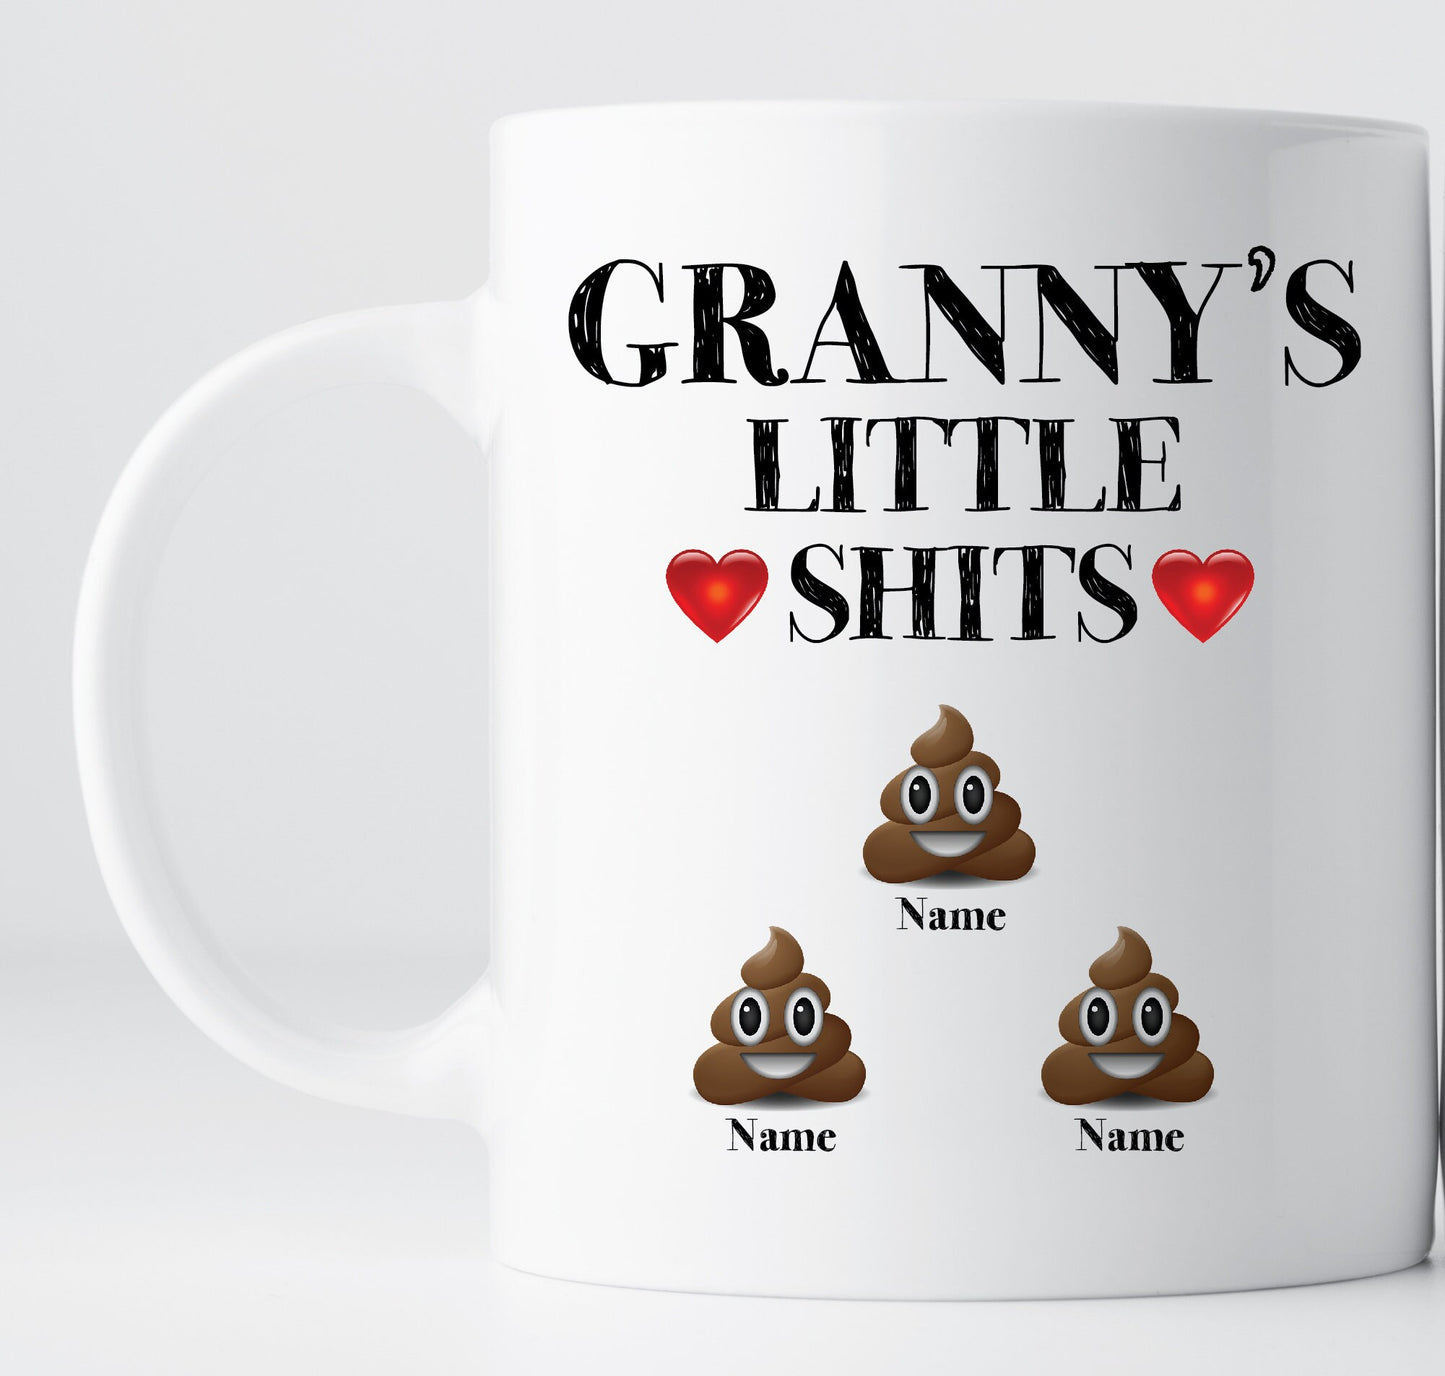 Granny's Little Shits Mug, Funny Personalised Mug For Gran, Customised Mother's Day Gift, Personalised Granny Mug, Funny Gift For Granny